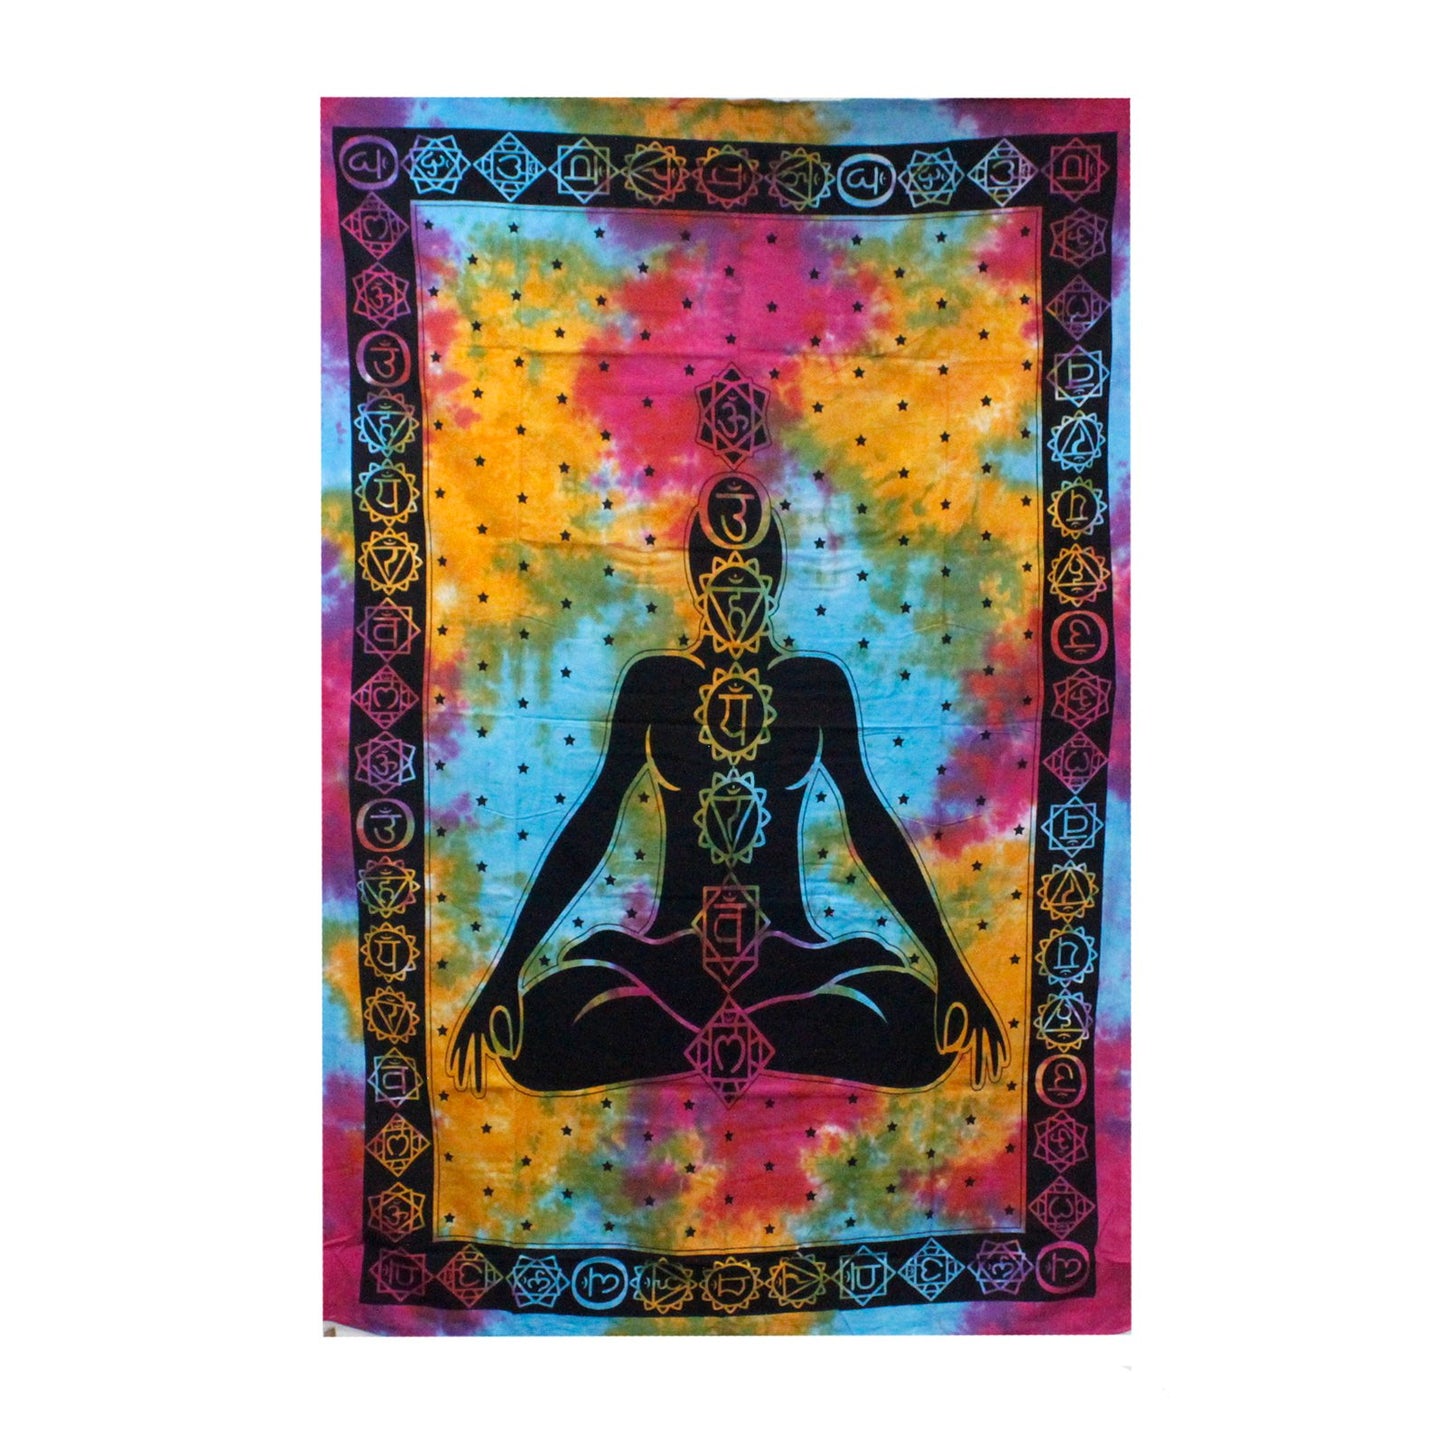 Cotton Bedspread and/or Wall Hanging - Chakra Buddha (Available in Single or Double)